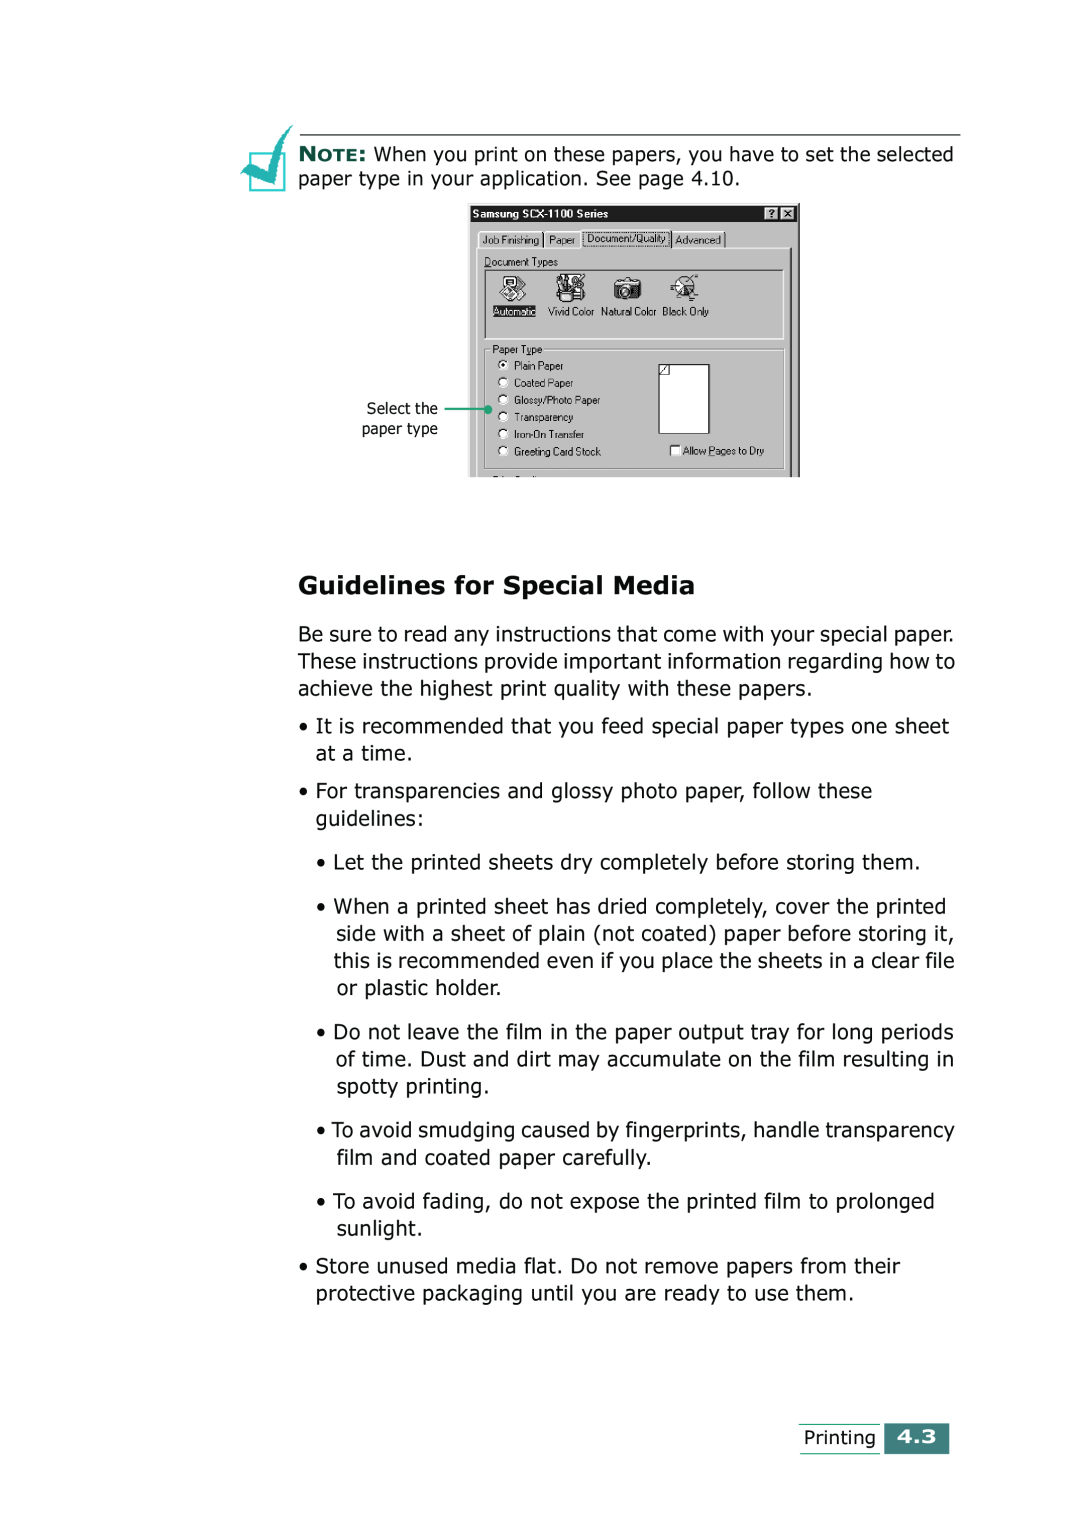 Samsung SCX-1100 manual Guidelines for Special Media 